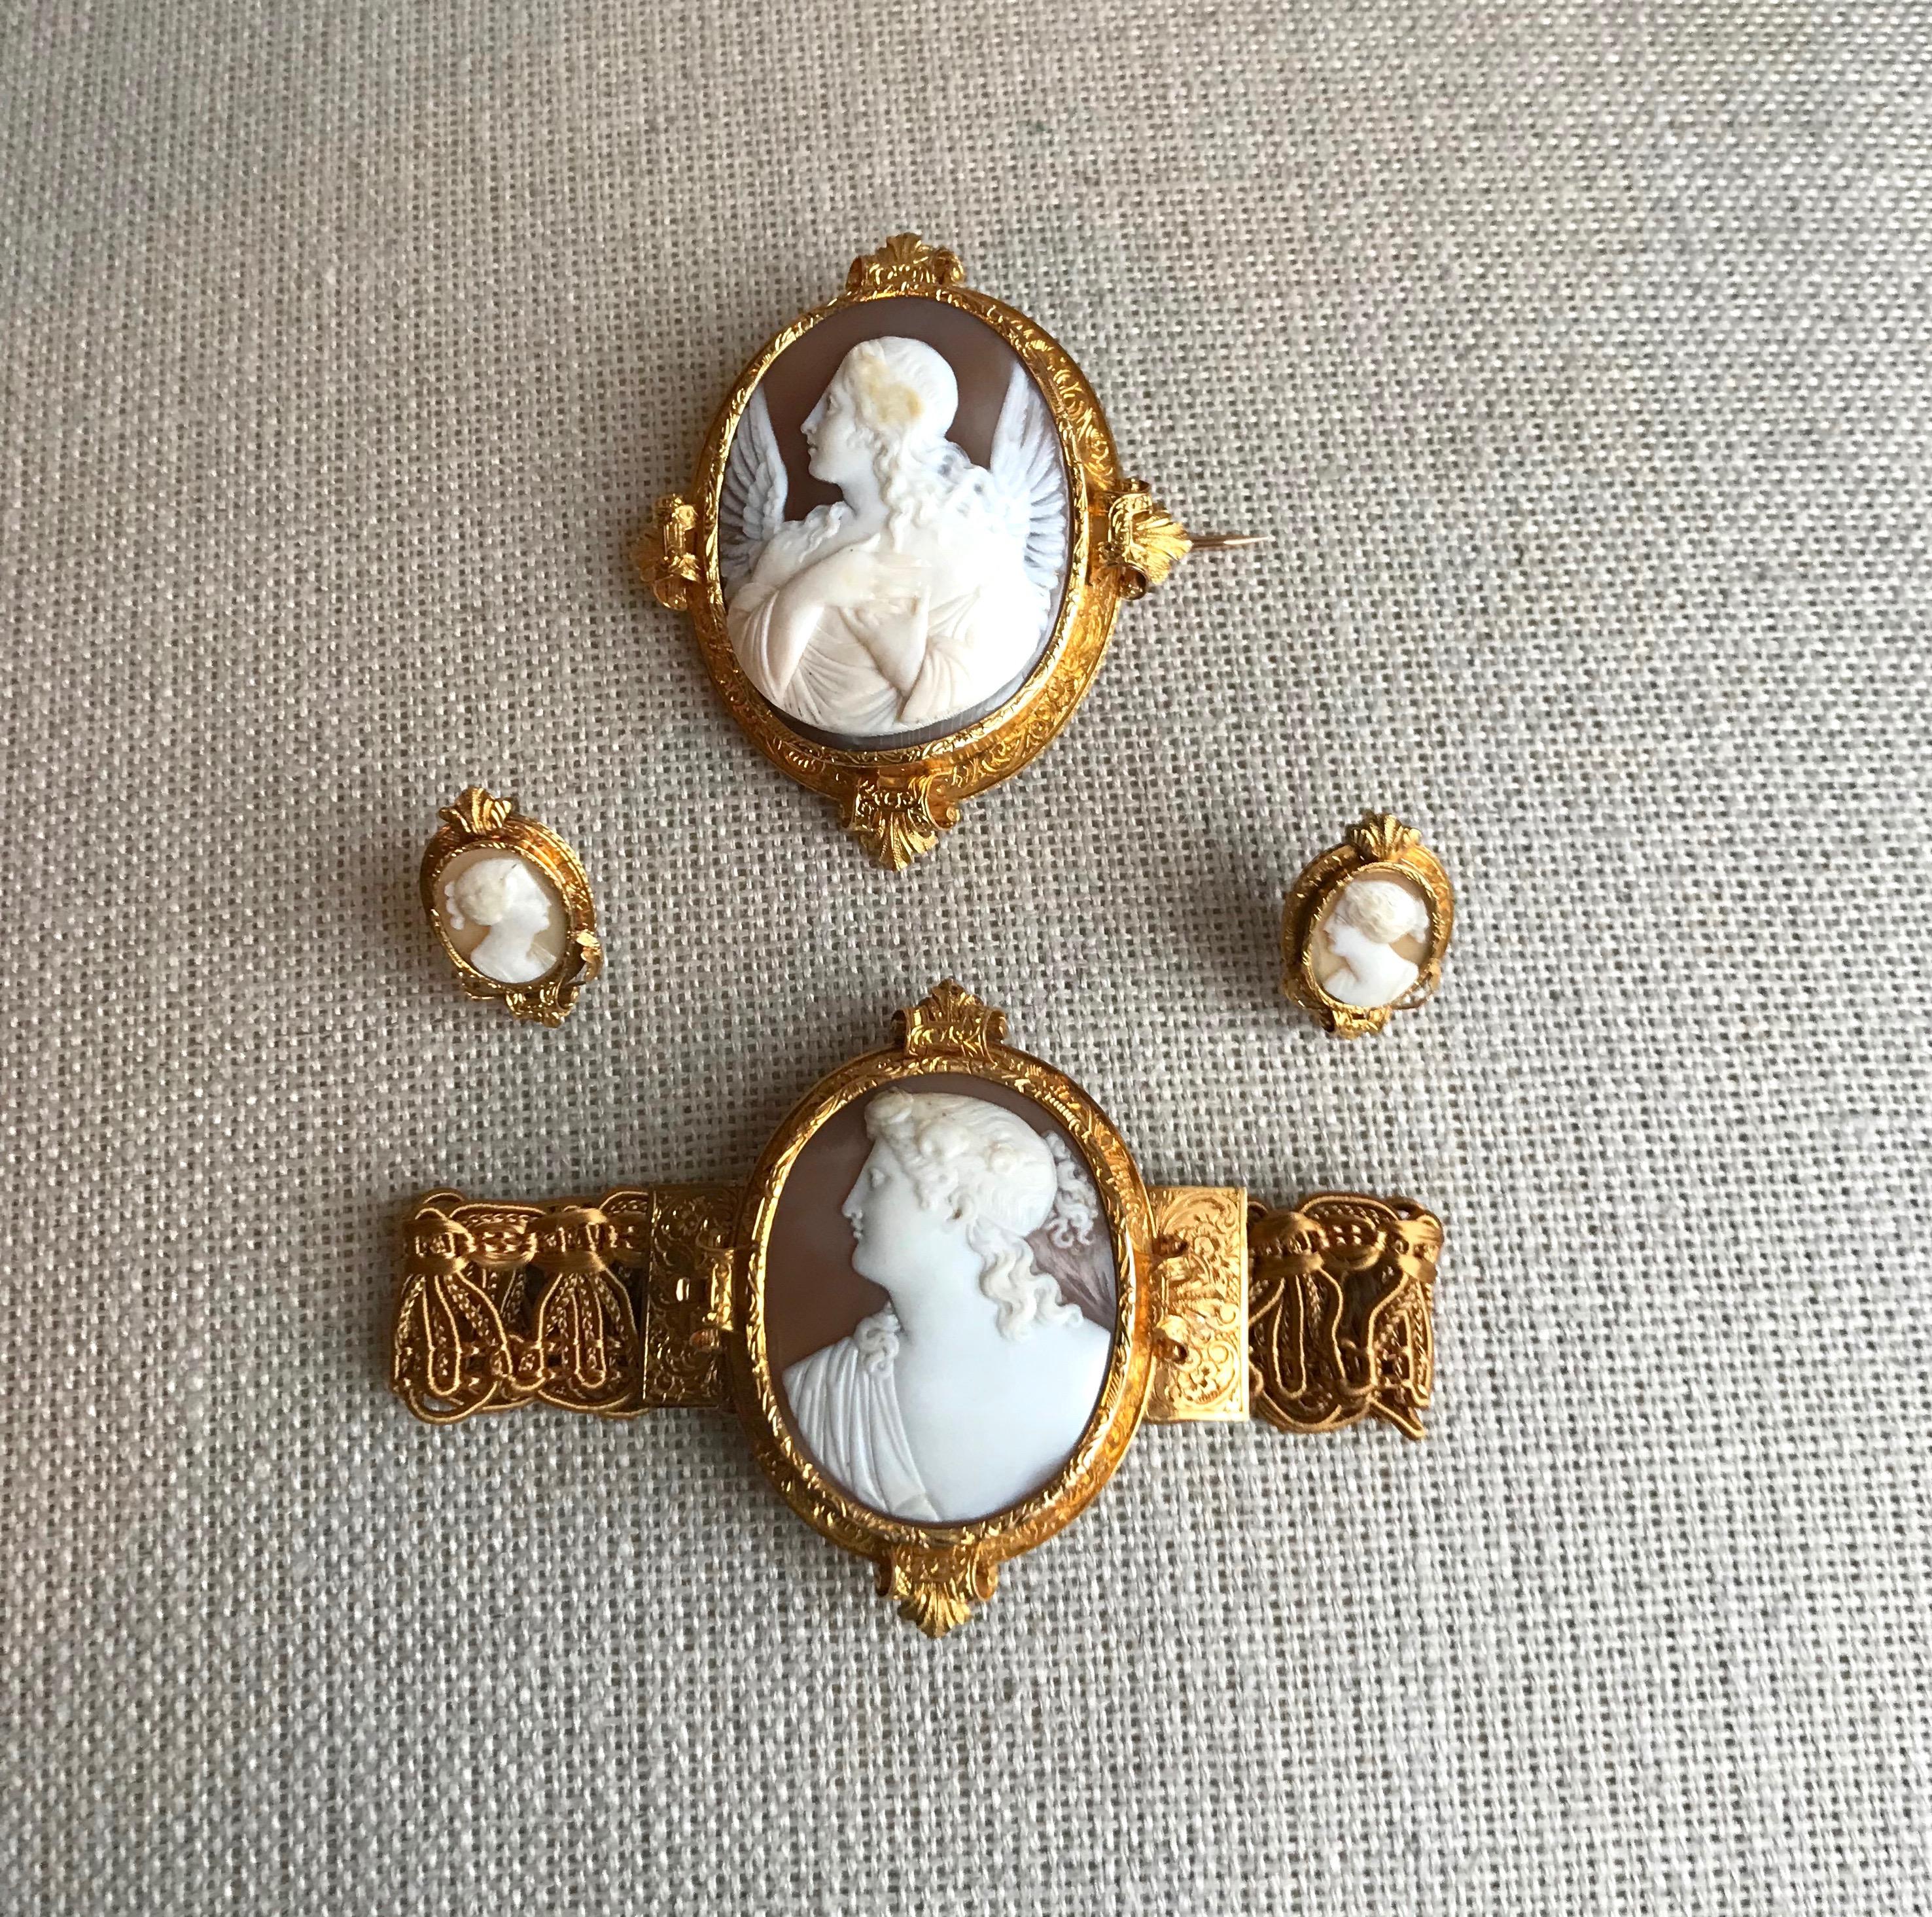 Froment-Meurice, Famous French jeweler in 19th Century, Set in 18 Carats Yellow Gold and Cameo, very Rare in its Case in original Shape, Late Nineteenth Century
Gross Weight of the set: 27.7 g 
Size Earrings: 2.3 high by 3.4 cm wide
Bracelet: 5 x